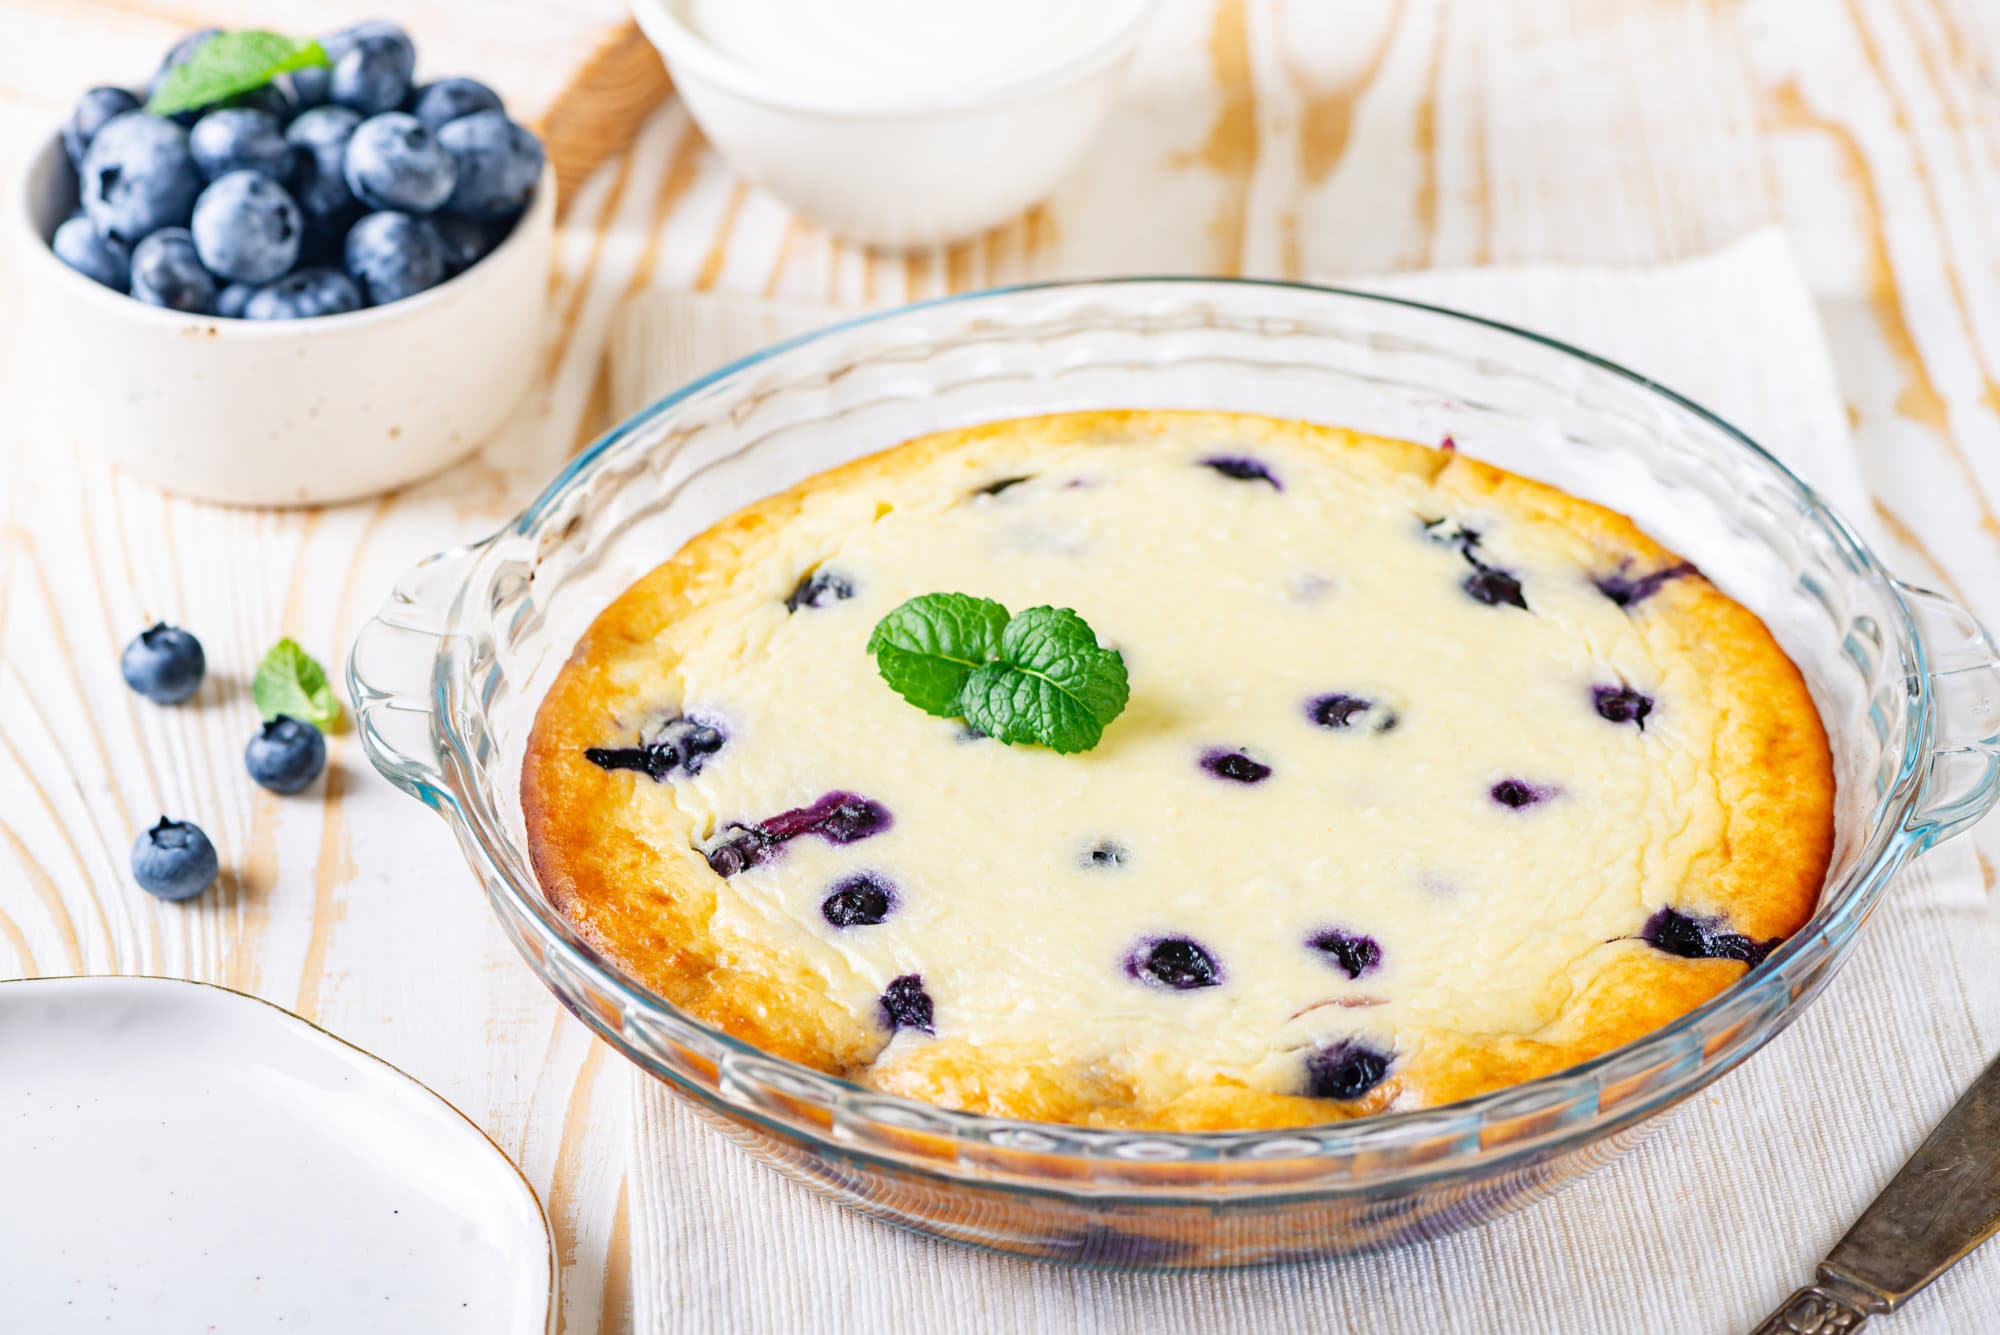 blueberry-cake-in-a-glass-dish-on-a-white-towel-with-a-bowl-of-blueberries-on-the-side